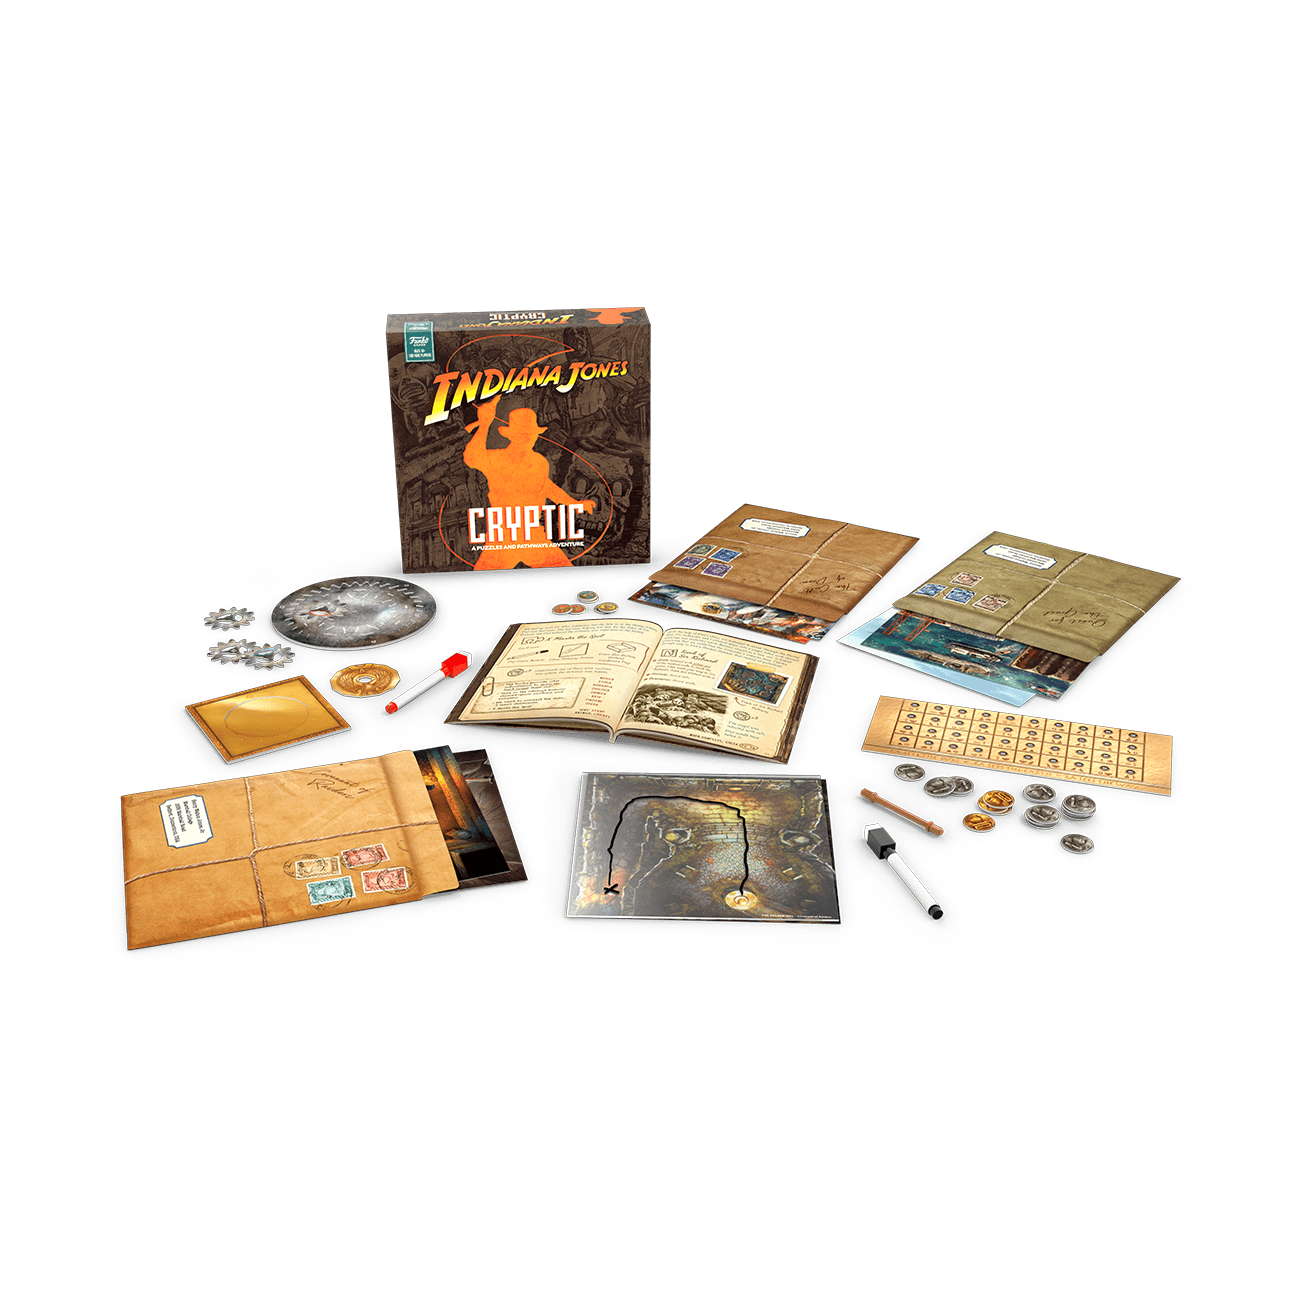 Indiana Jones Cryptic box and contents